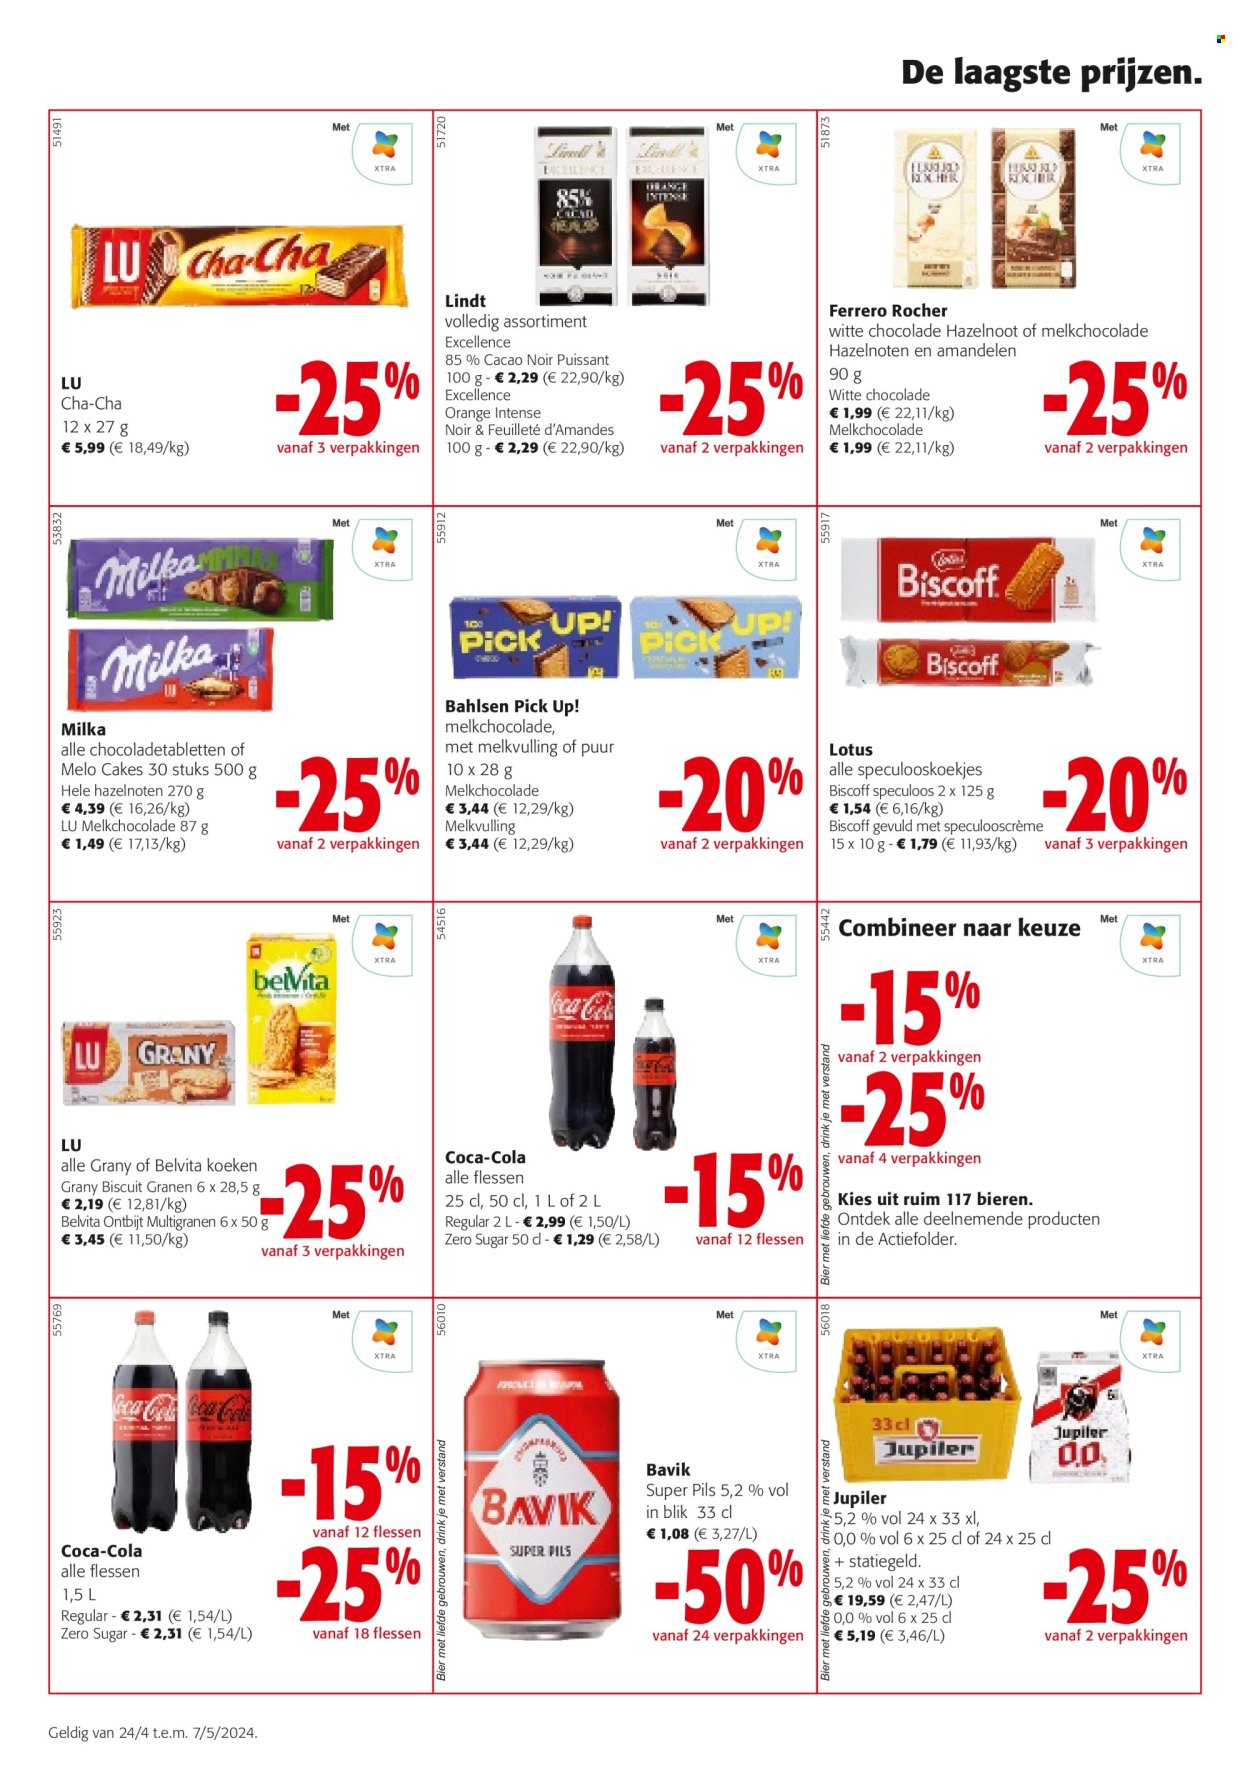 thumbnail - Catalogue Colruyt - 24/04/2024 - 07/05/2024 - Produits soldés - Milka, Ferrero Rocher, speculoos, Lotus, biscuits, Lindt, LU, cacao, Coca-Cola. Page 4.